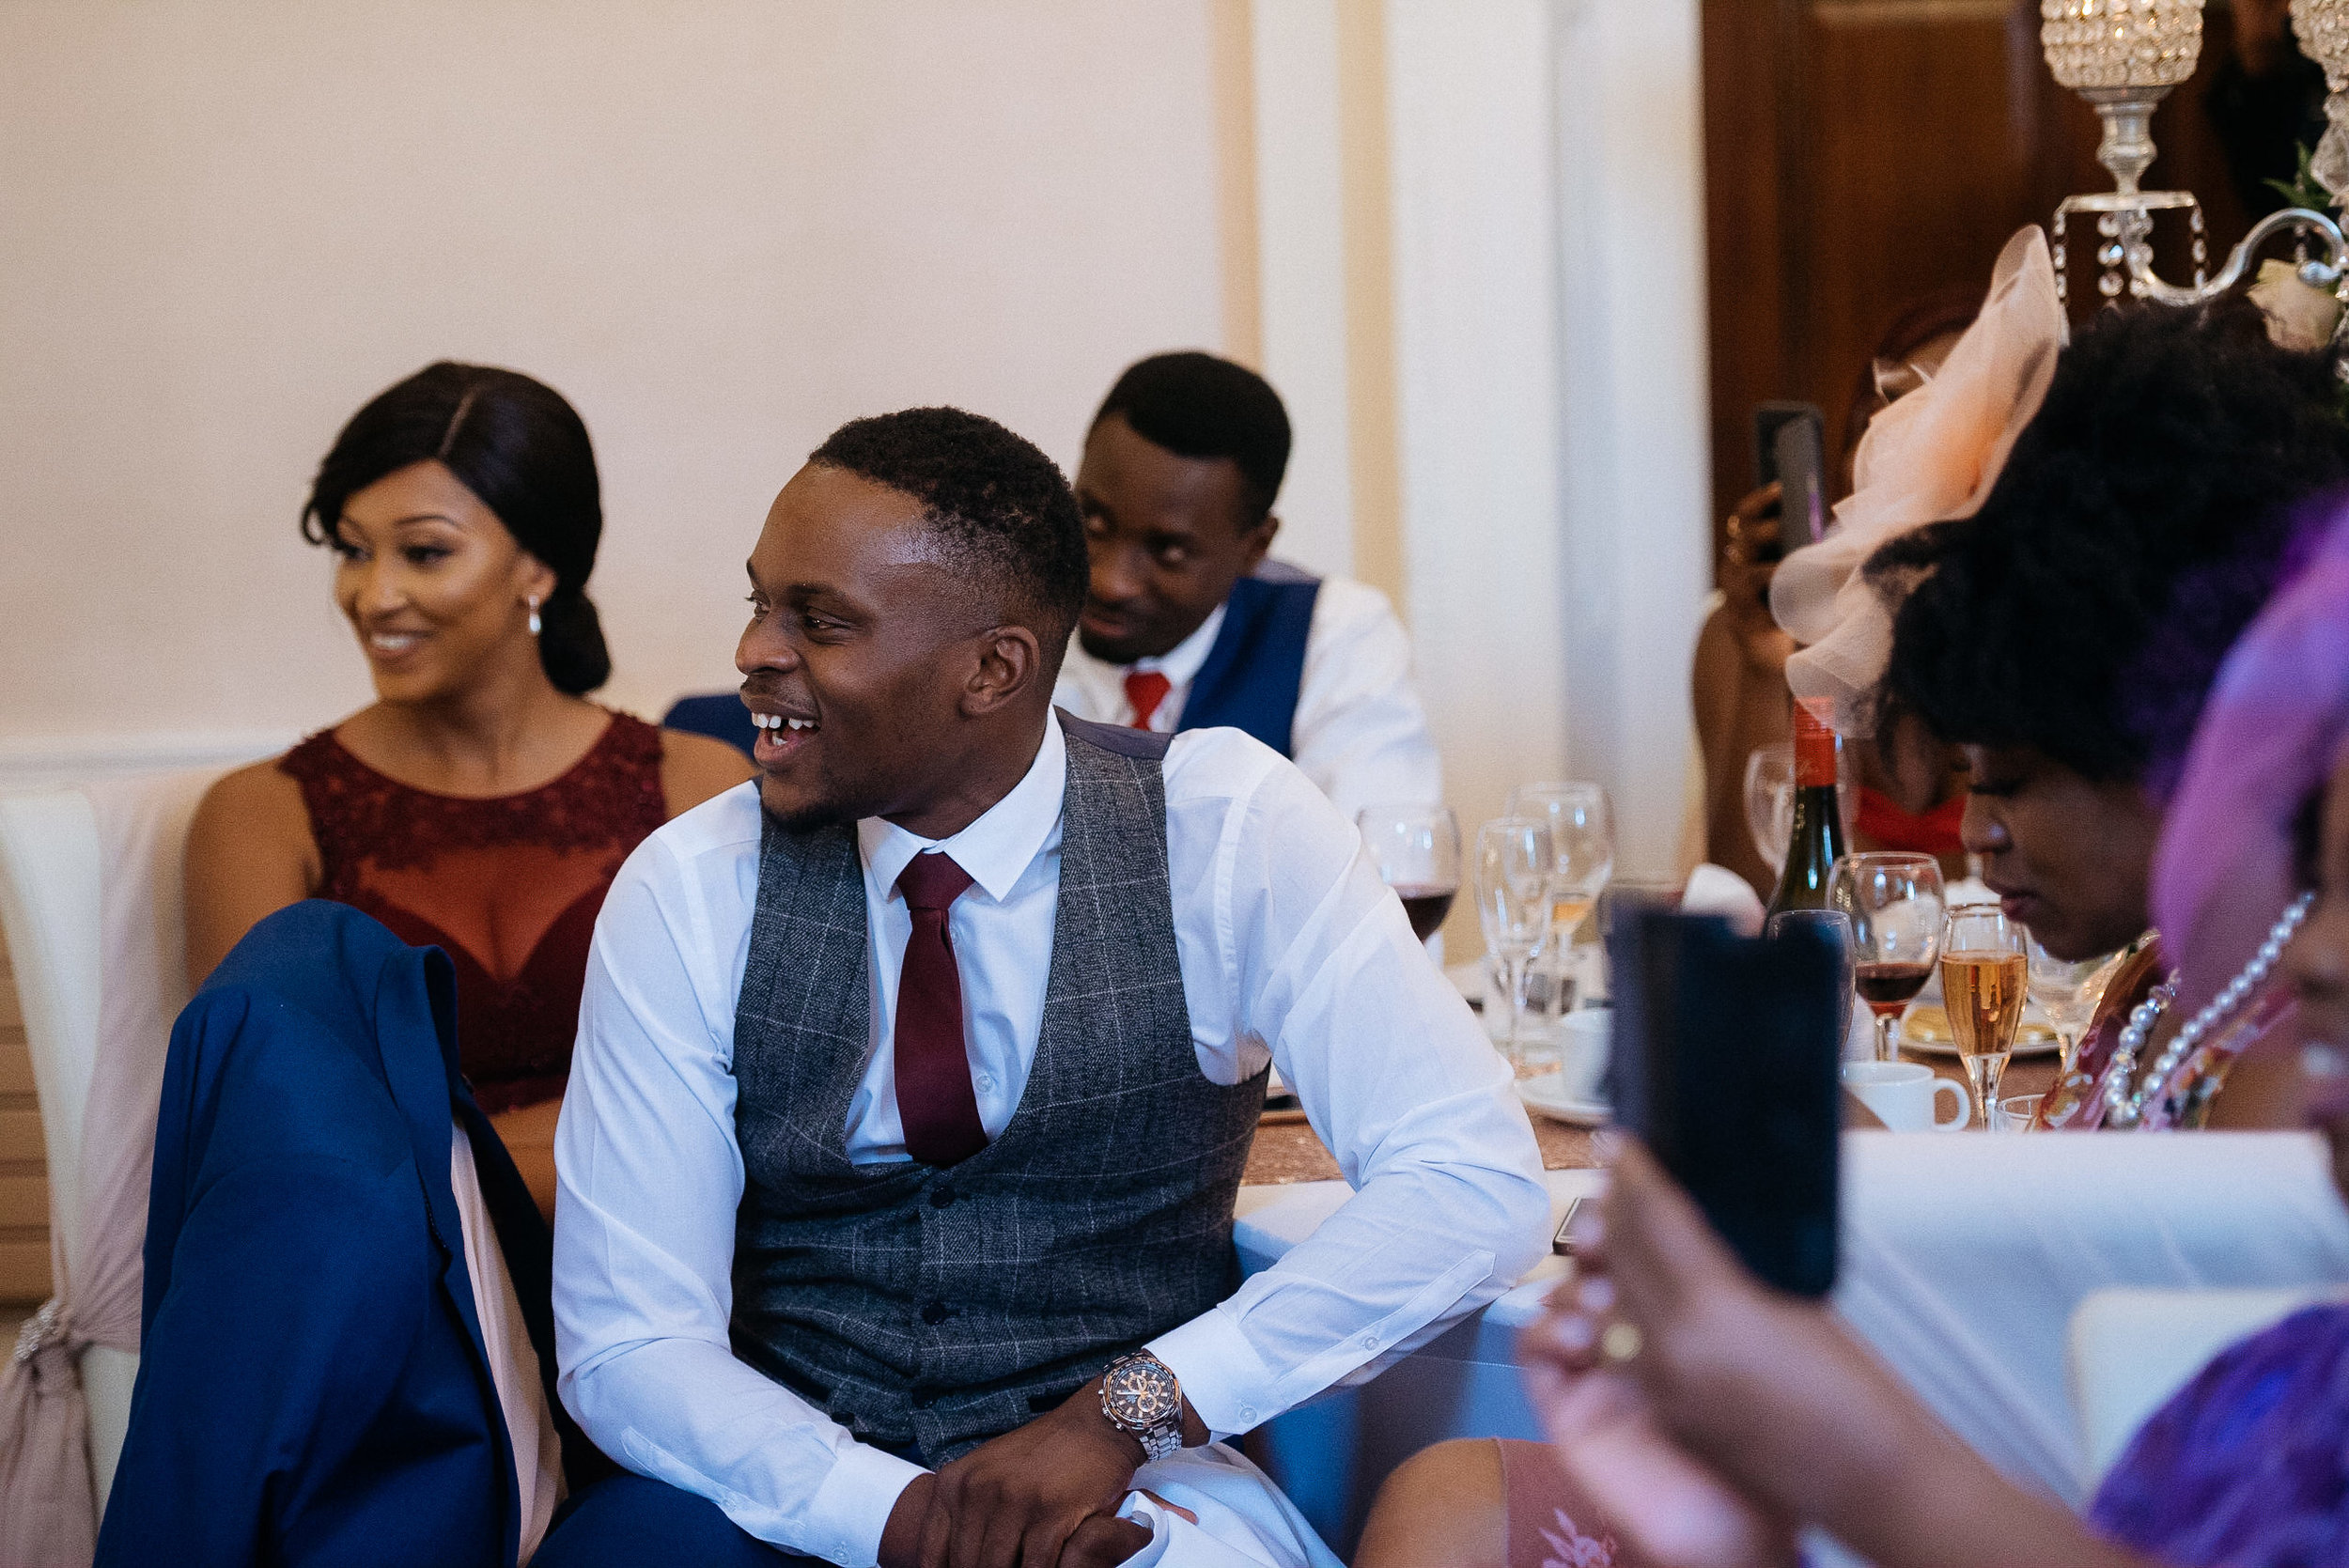 Guests having fun during the wedding speeches